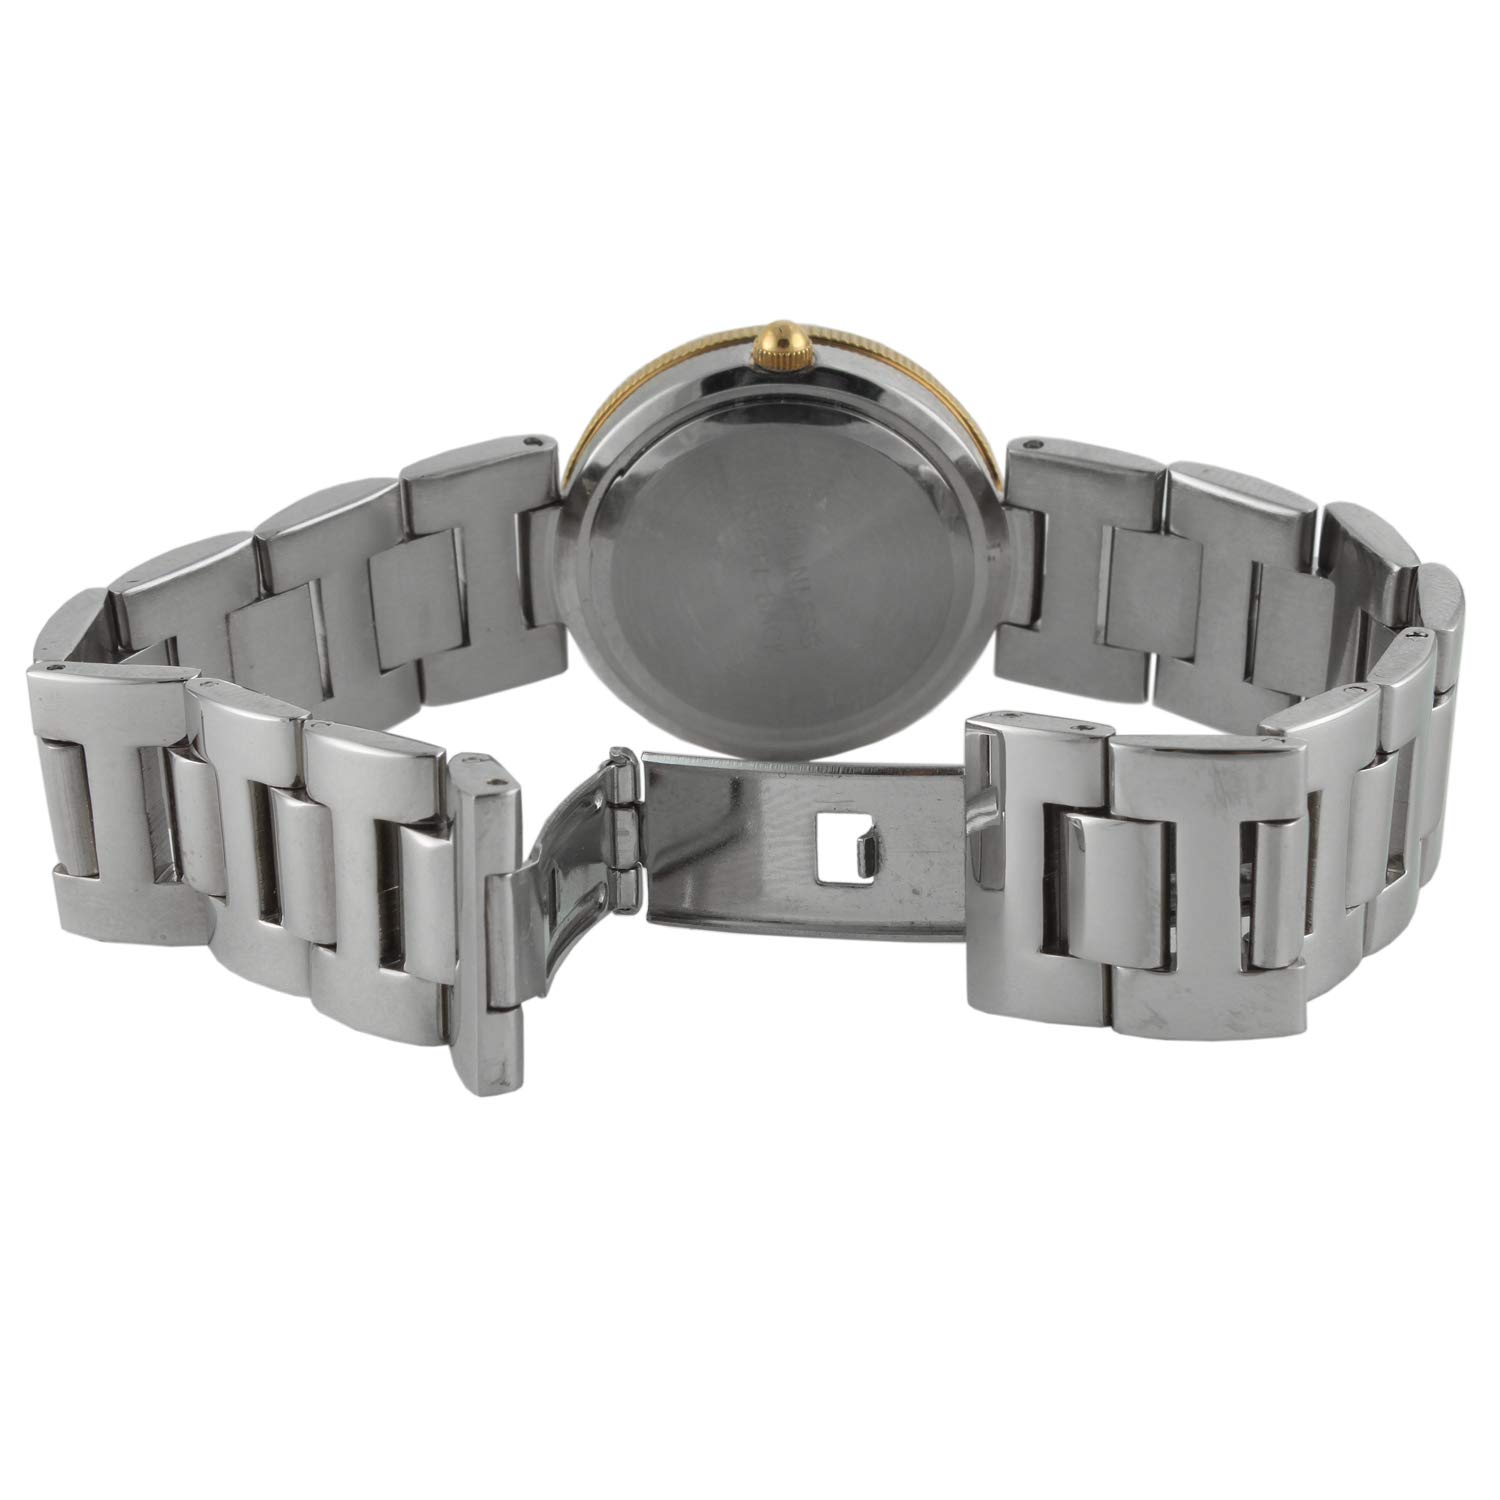 Peugeot Women Everyday Wrist Watch - Classic and Fashion with Silver Tone Bracelet